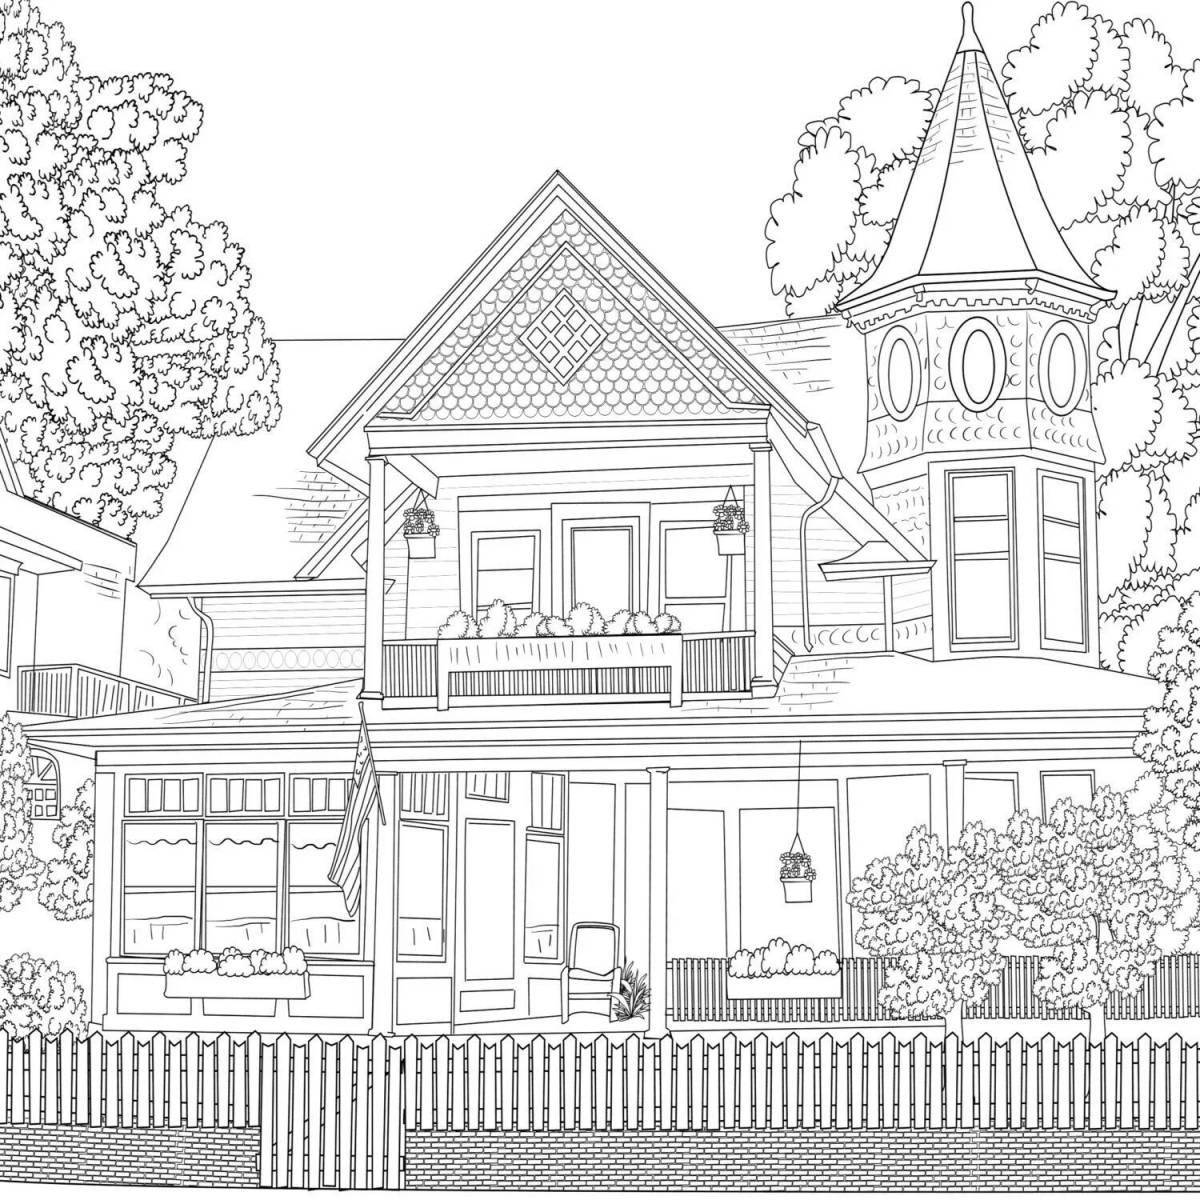 Coloring book rich palace house